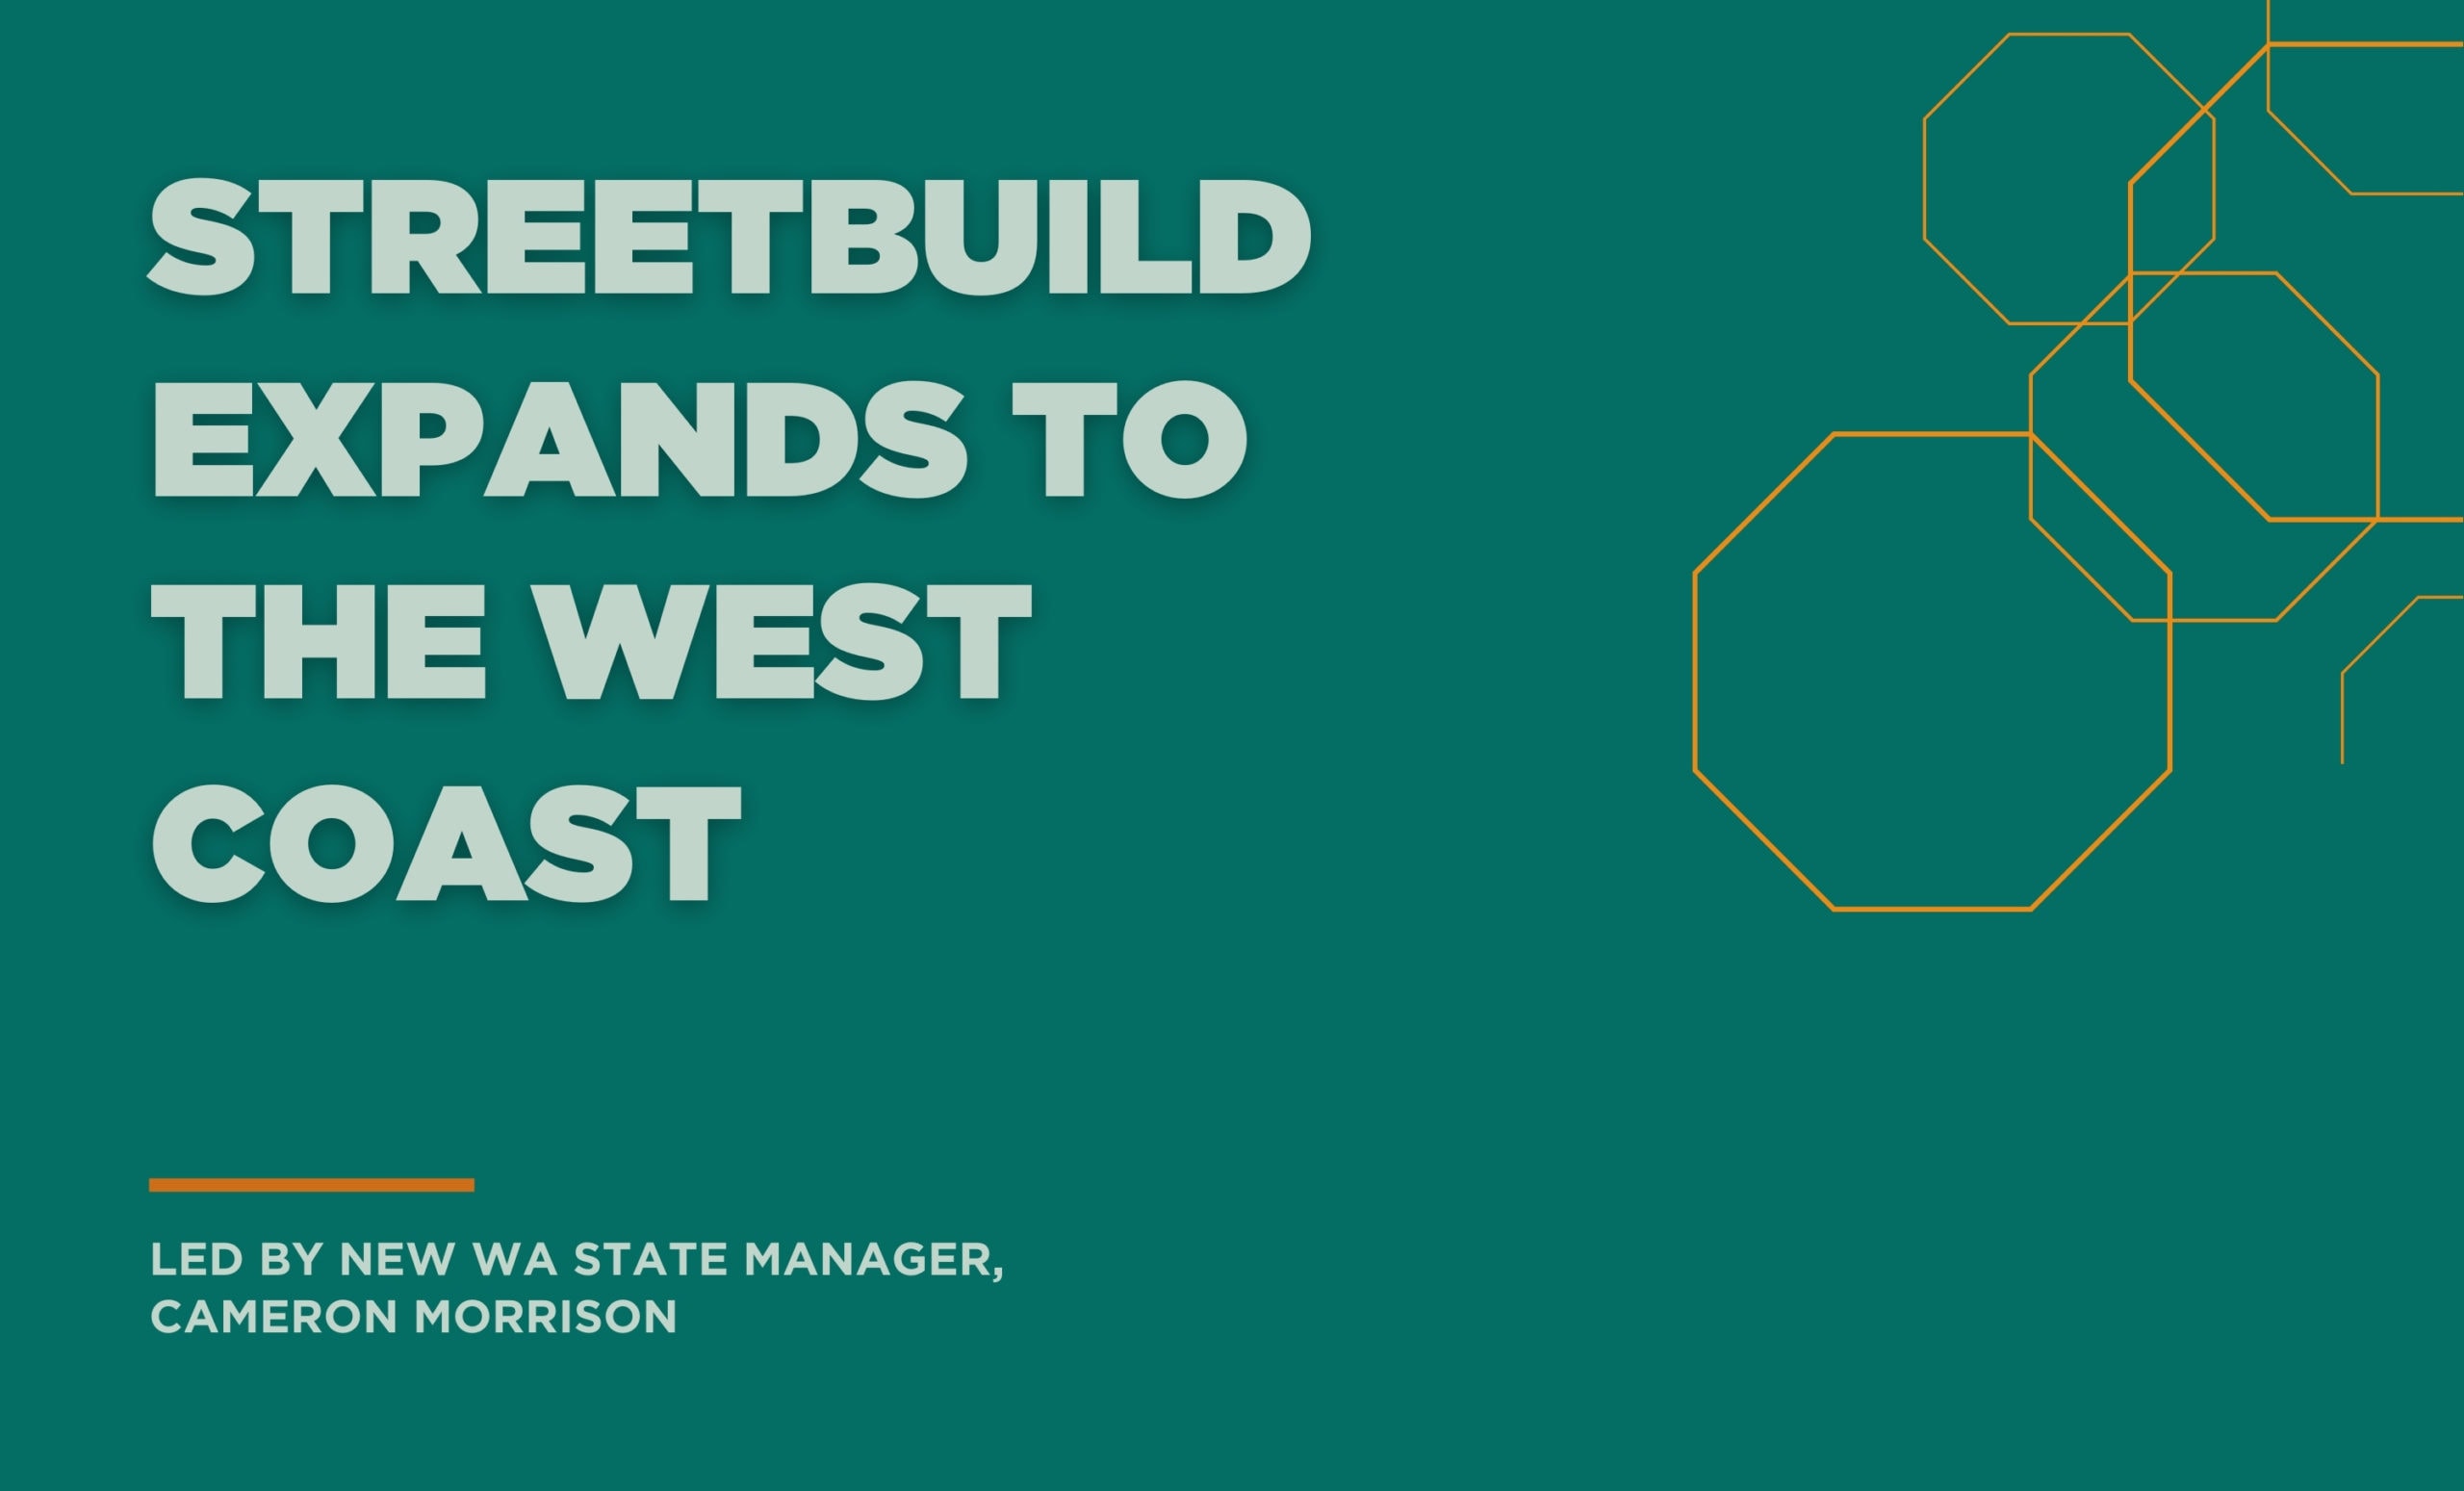 Streetbuild expands to the West Coast